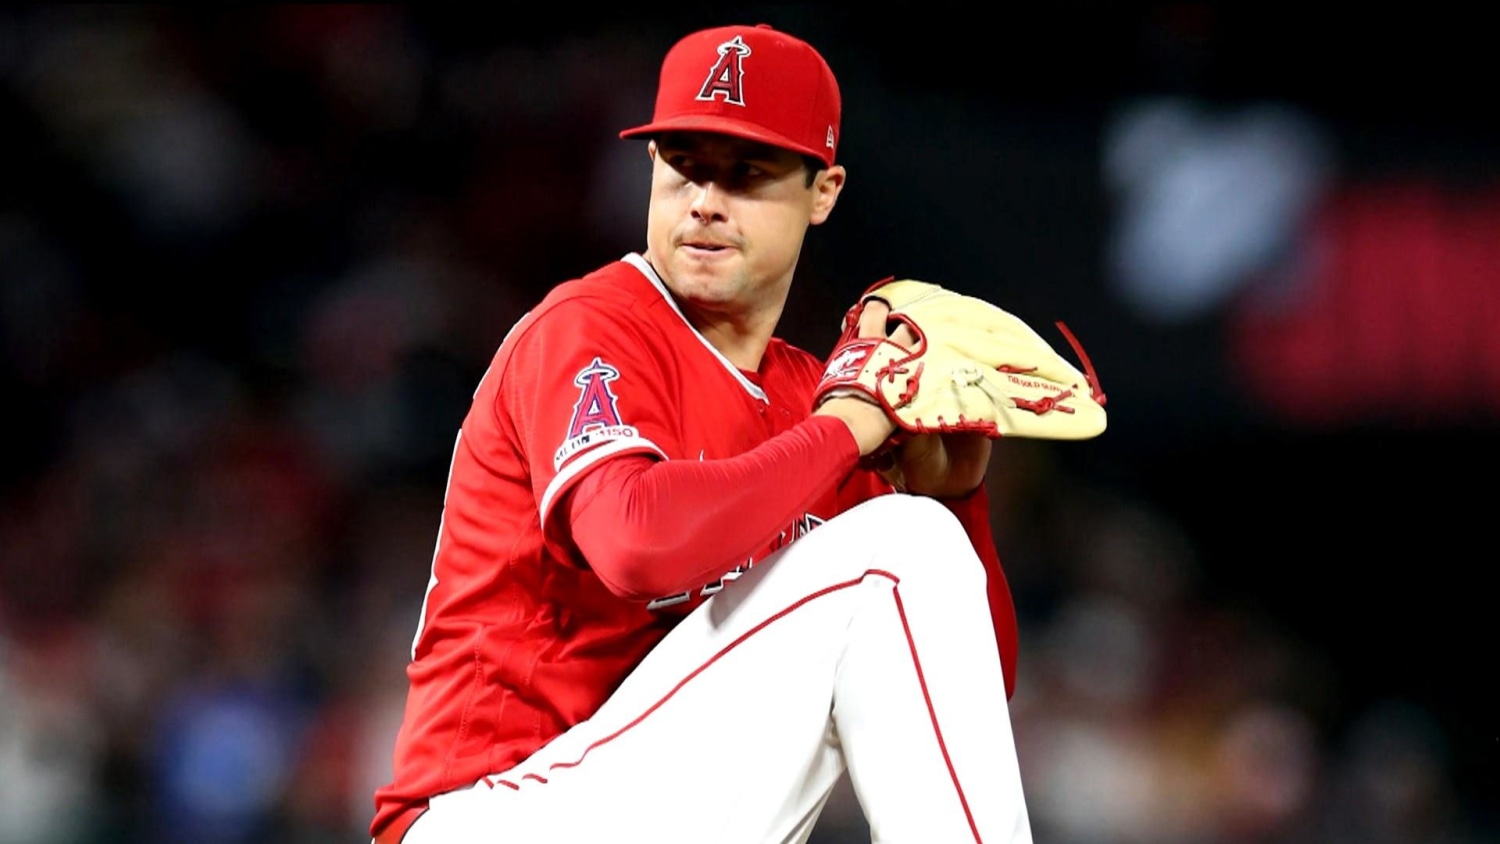 Tyler Skaggs' Family Speaks Out on Anniversary of His Death